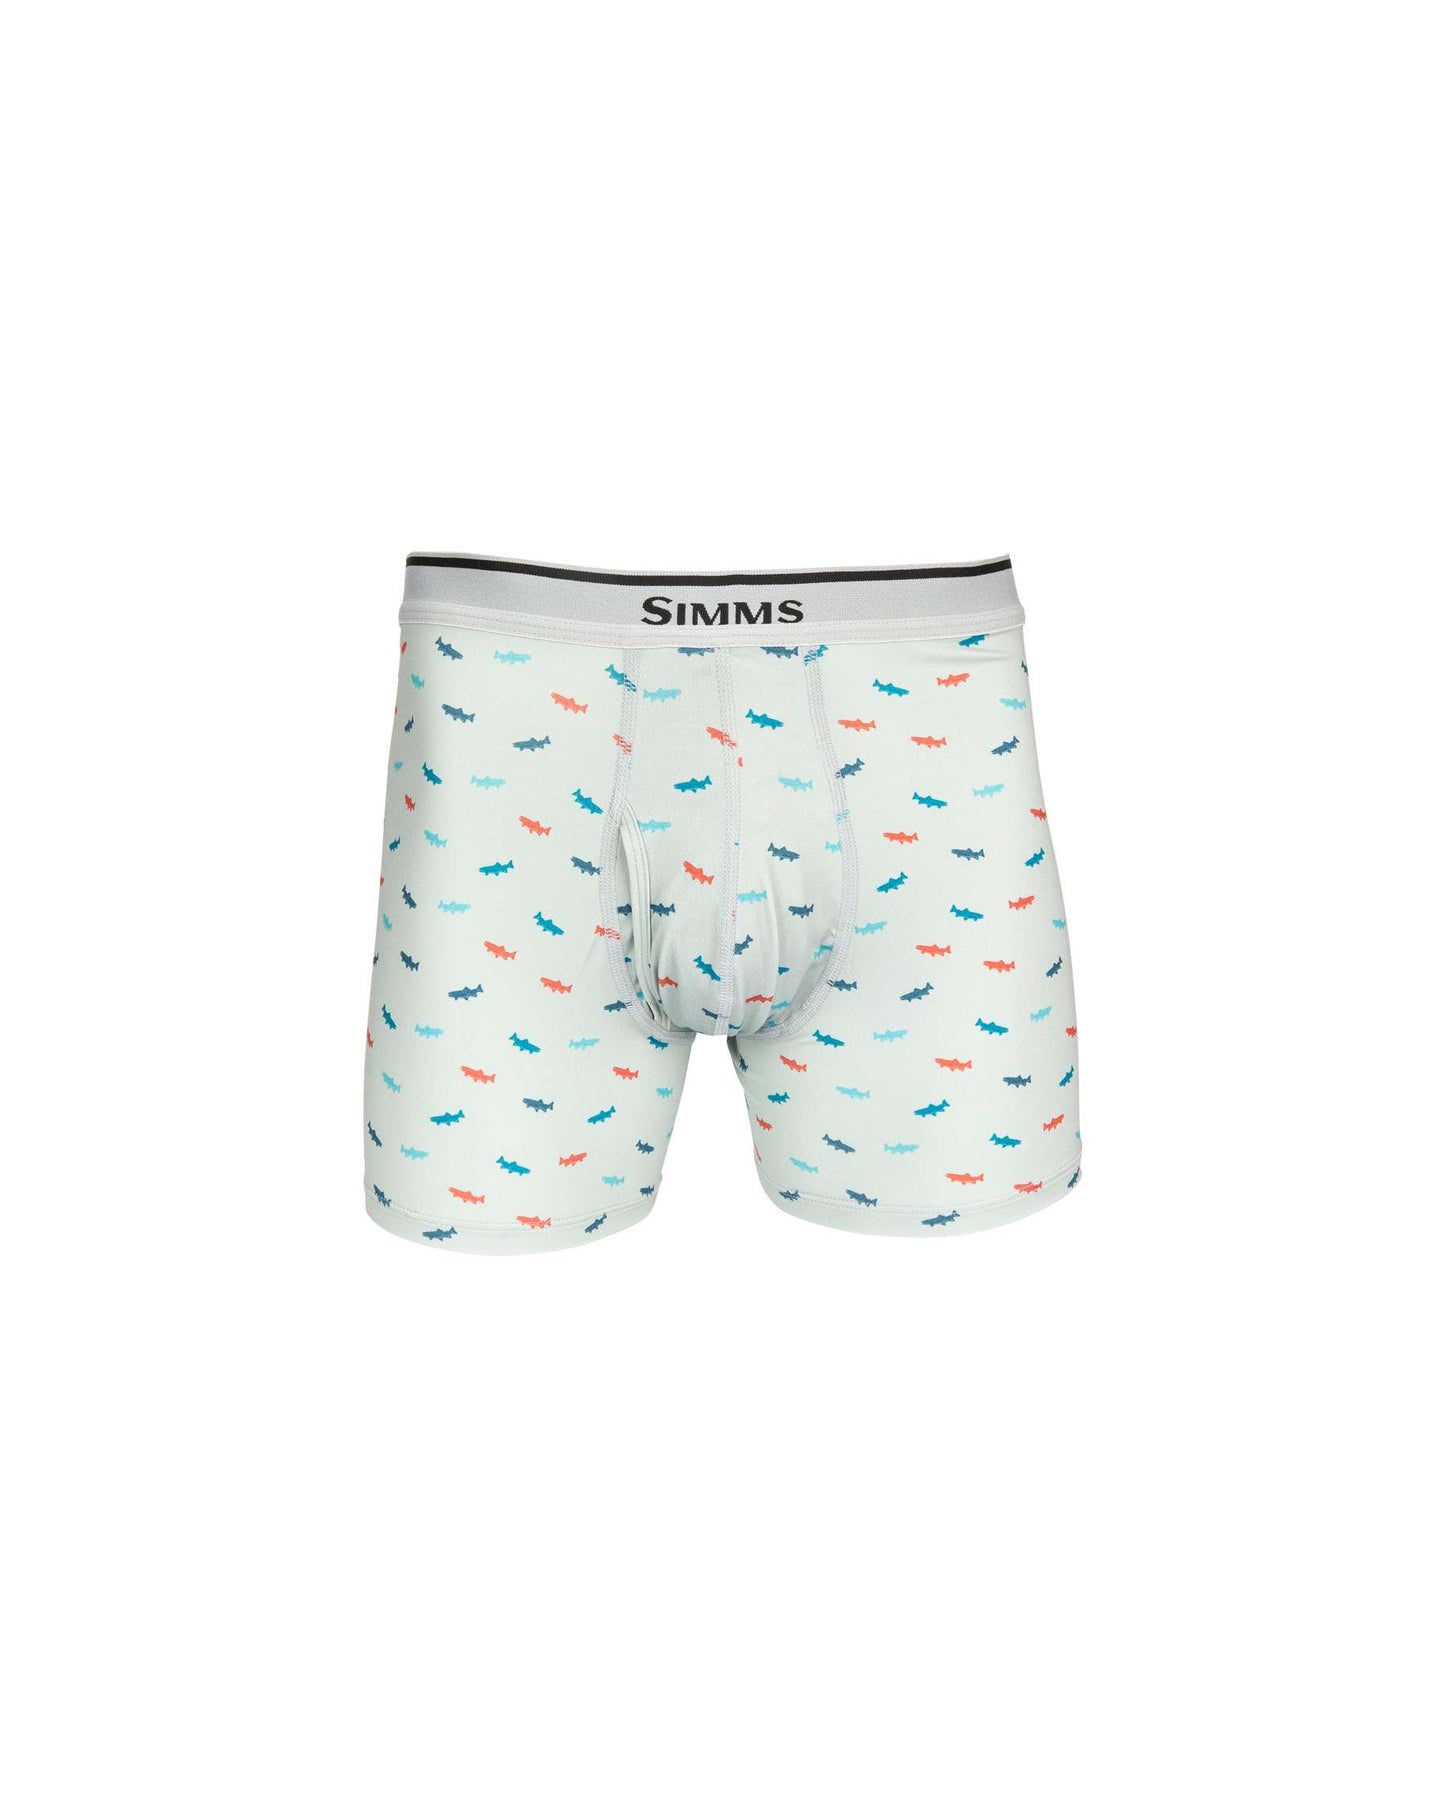 M's Simms Boxer Brief - Trout Critter Sterling